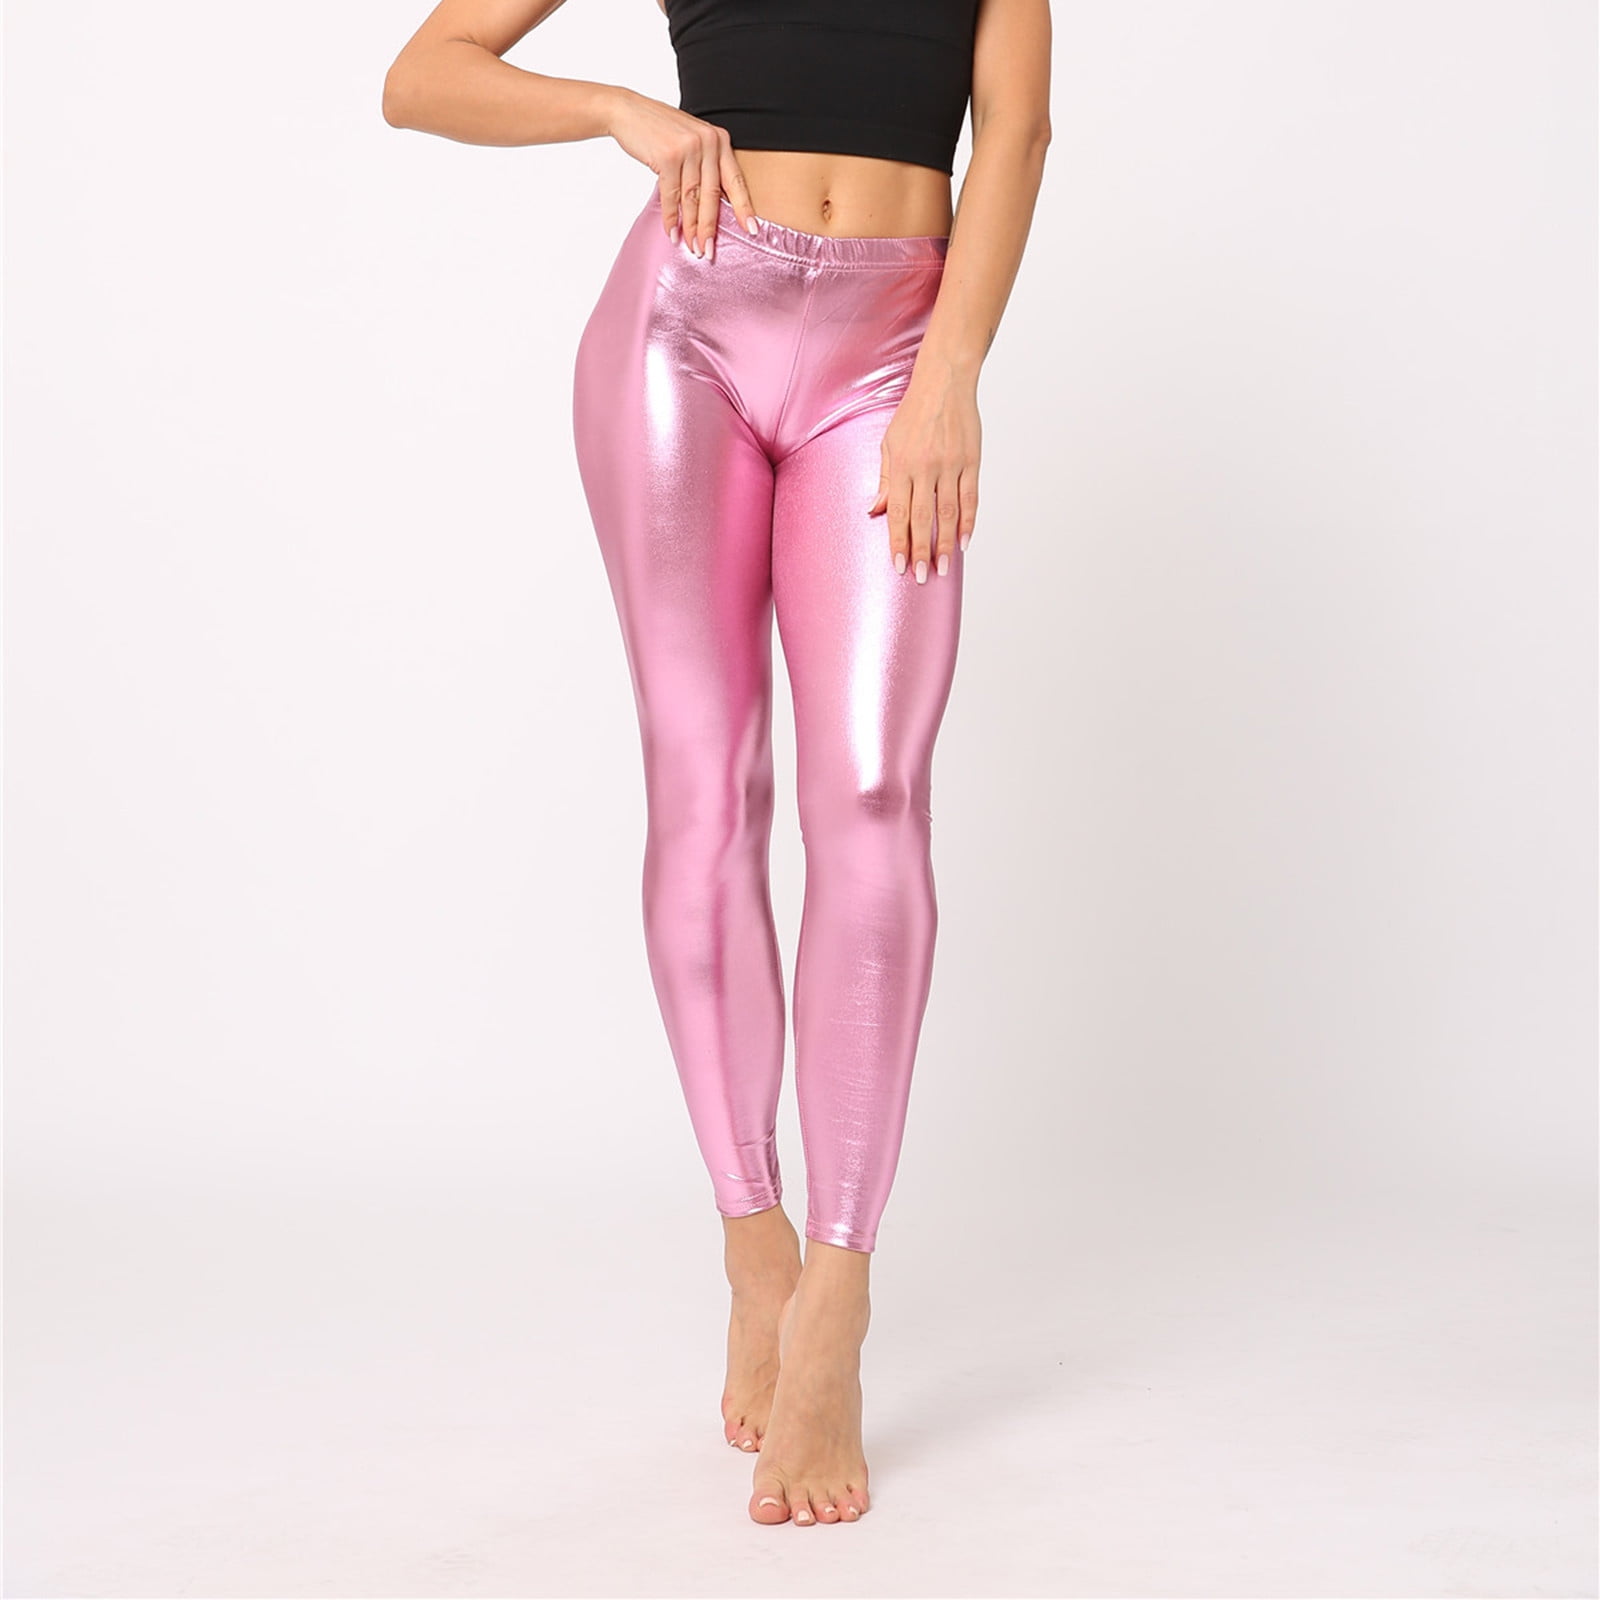 YYDGH Women's Shiny Metallic Leggings Sexy High Gloss Skinny Pants Faux  Leather Stretch Shaping Tights Trousers Multi-color XL 